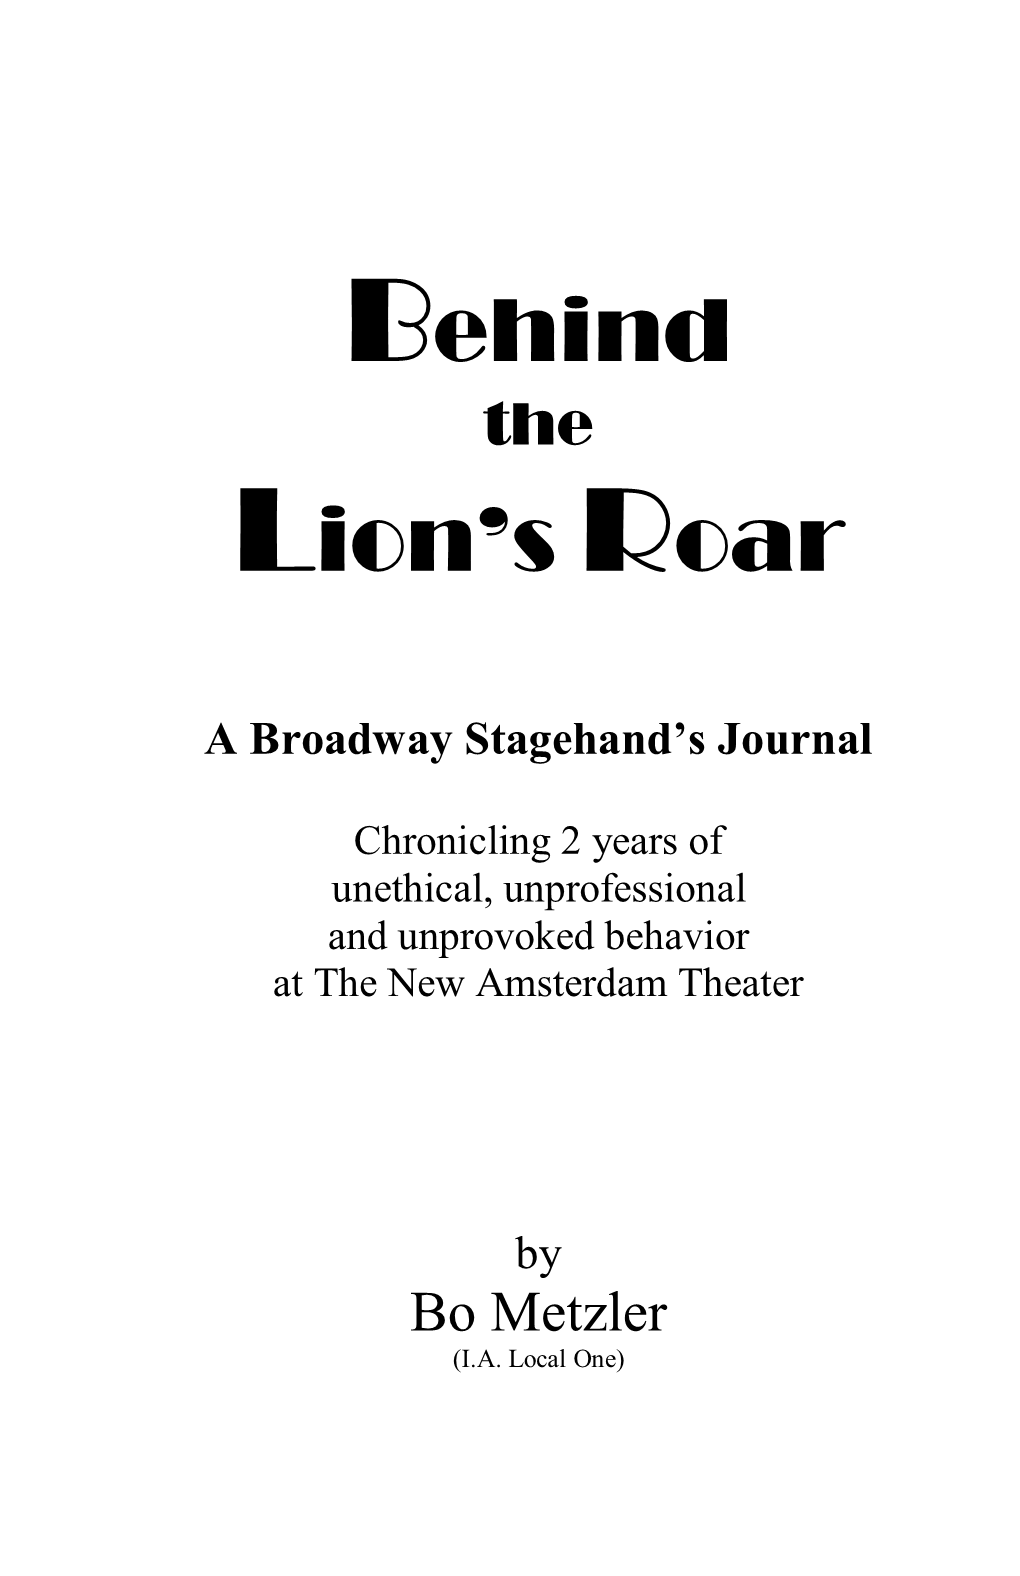 What We Do—Working in the Theatre Covering the Scope of Work in the Professional Theatre and How It All Interrelates in the Production of a Broadway Show